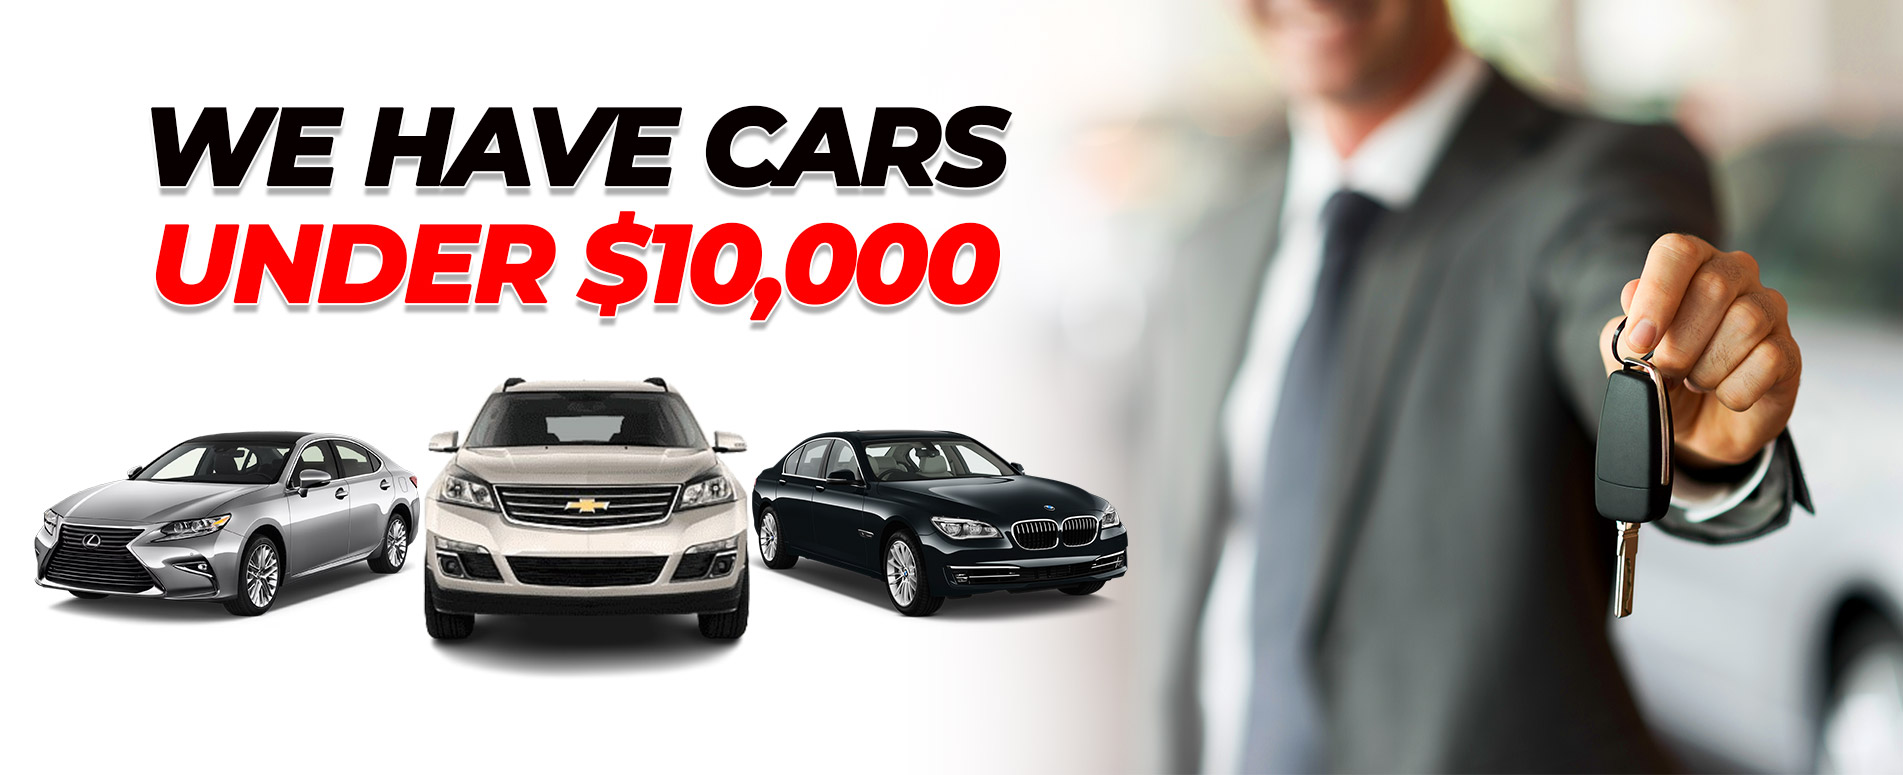 We have cars under $10,000